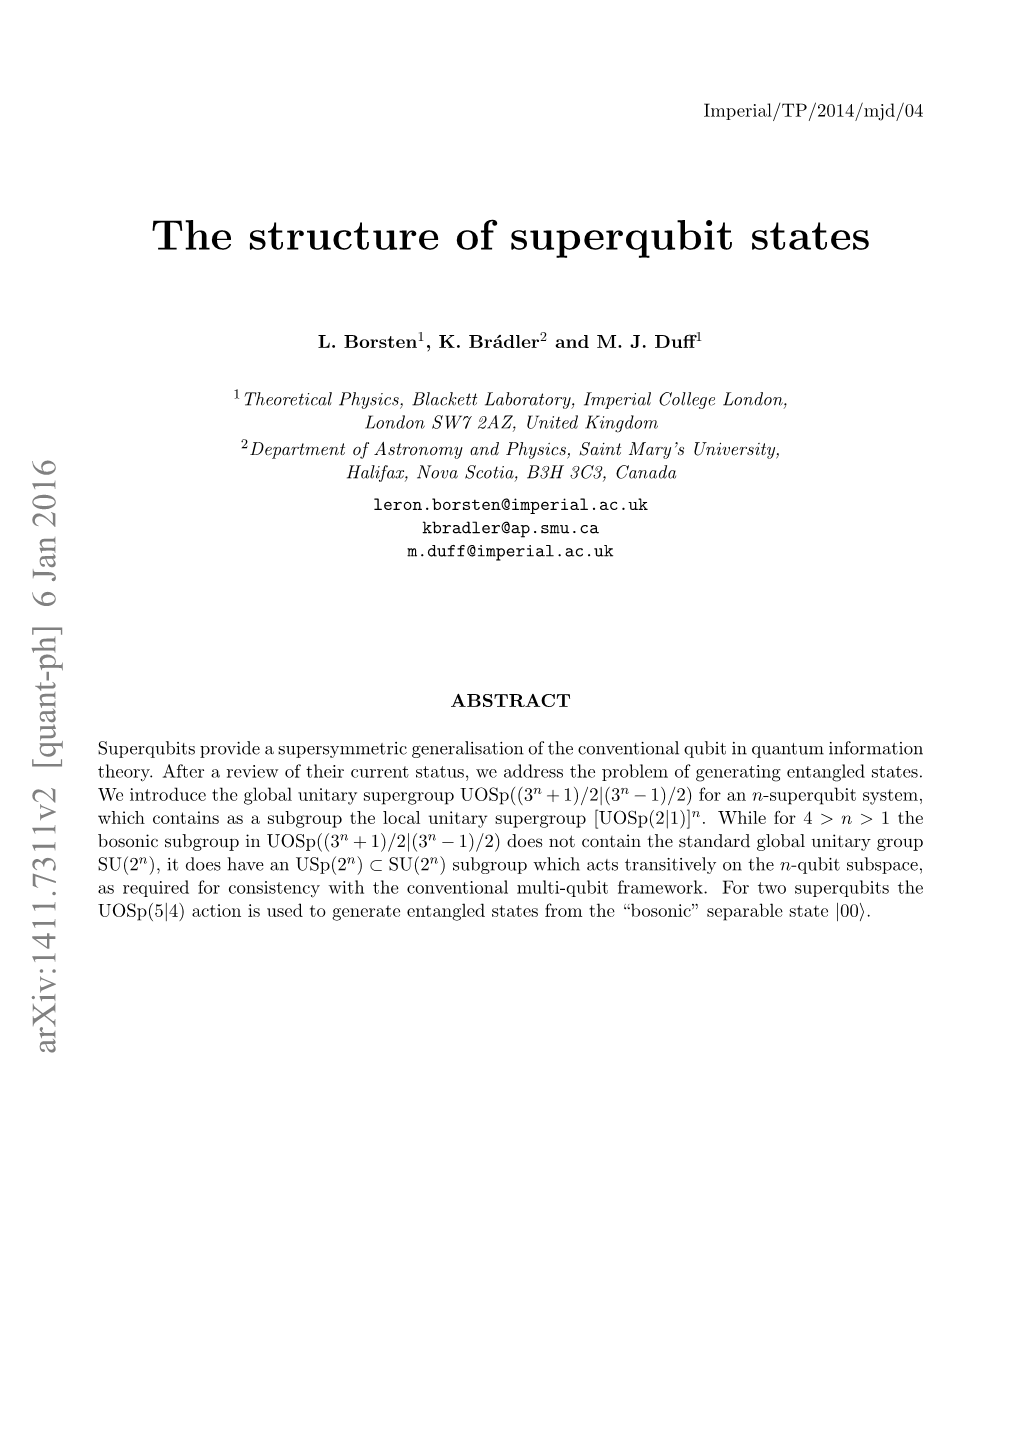 The Structure of Superqubit States